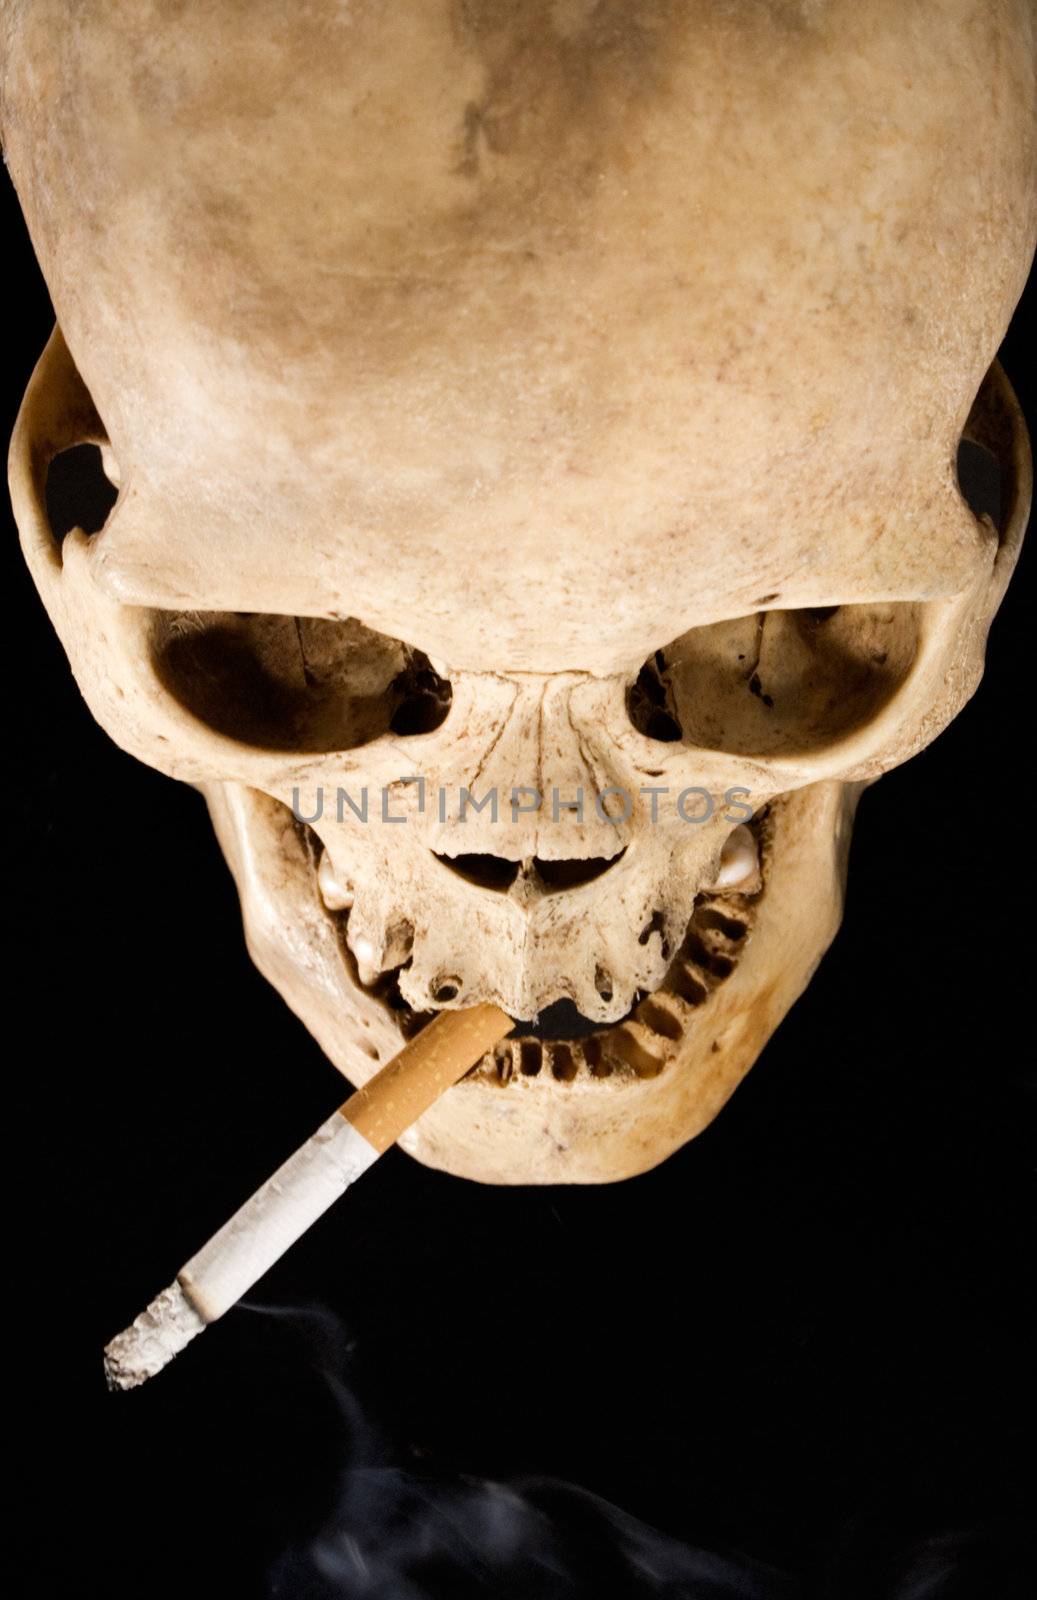 Human Skull and Cigarette by winterling